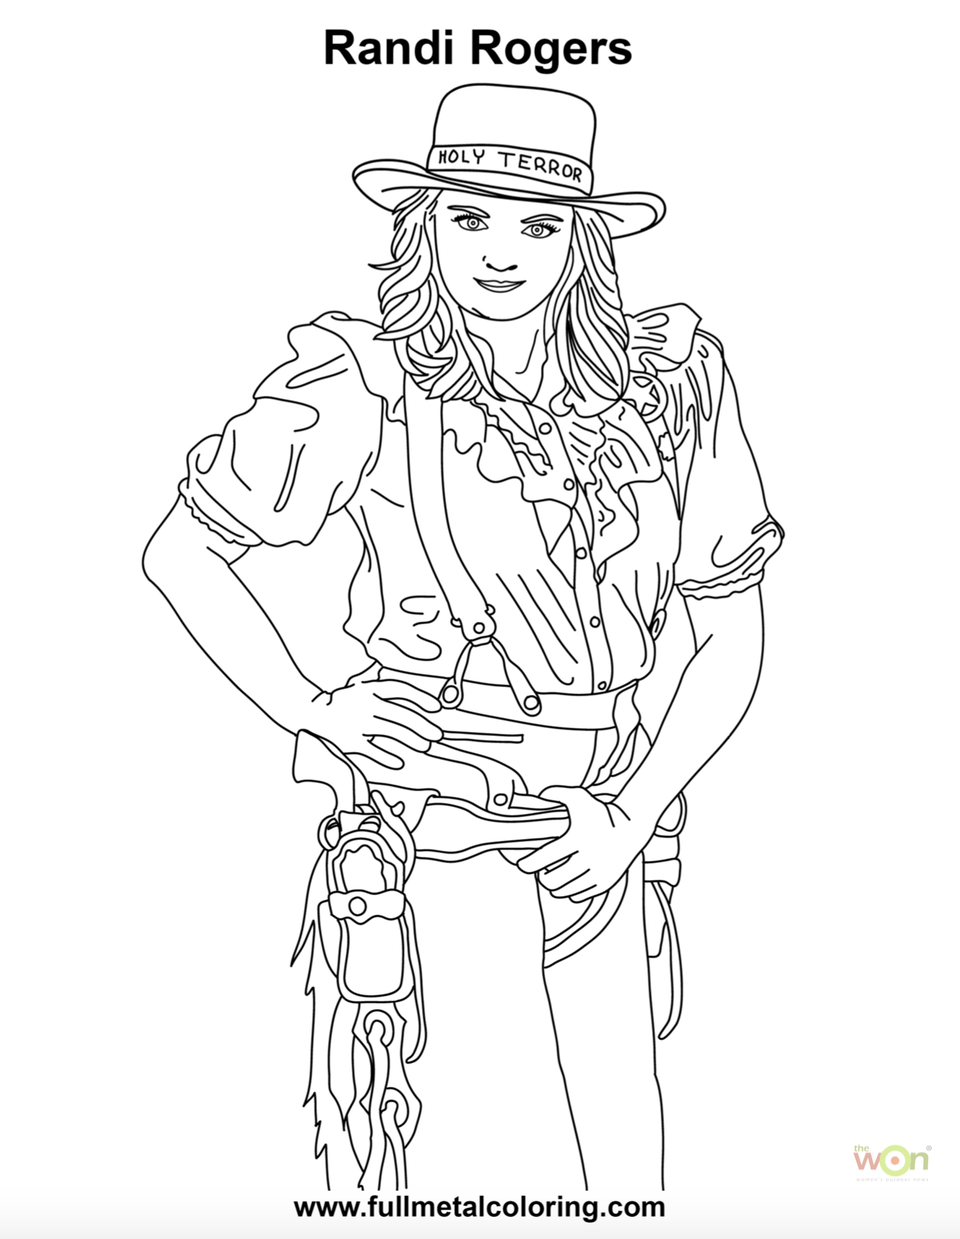 Randi Rogers coloring page